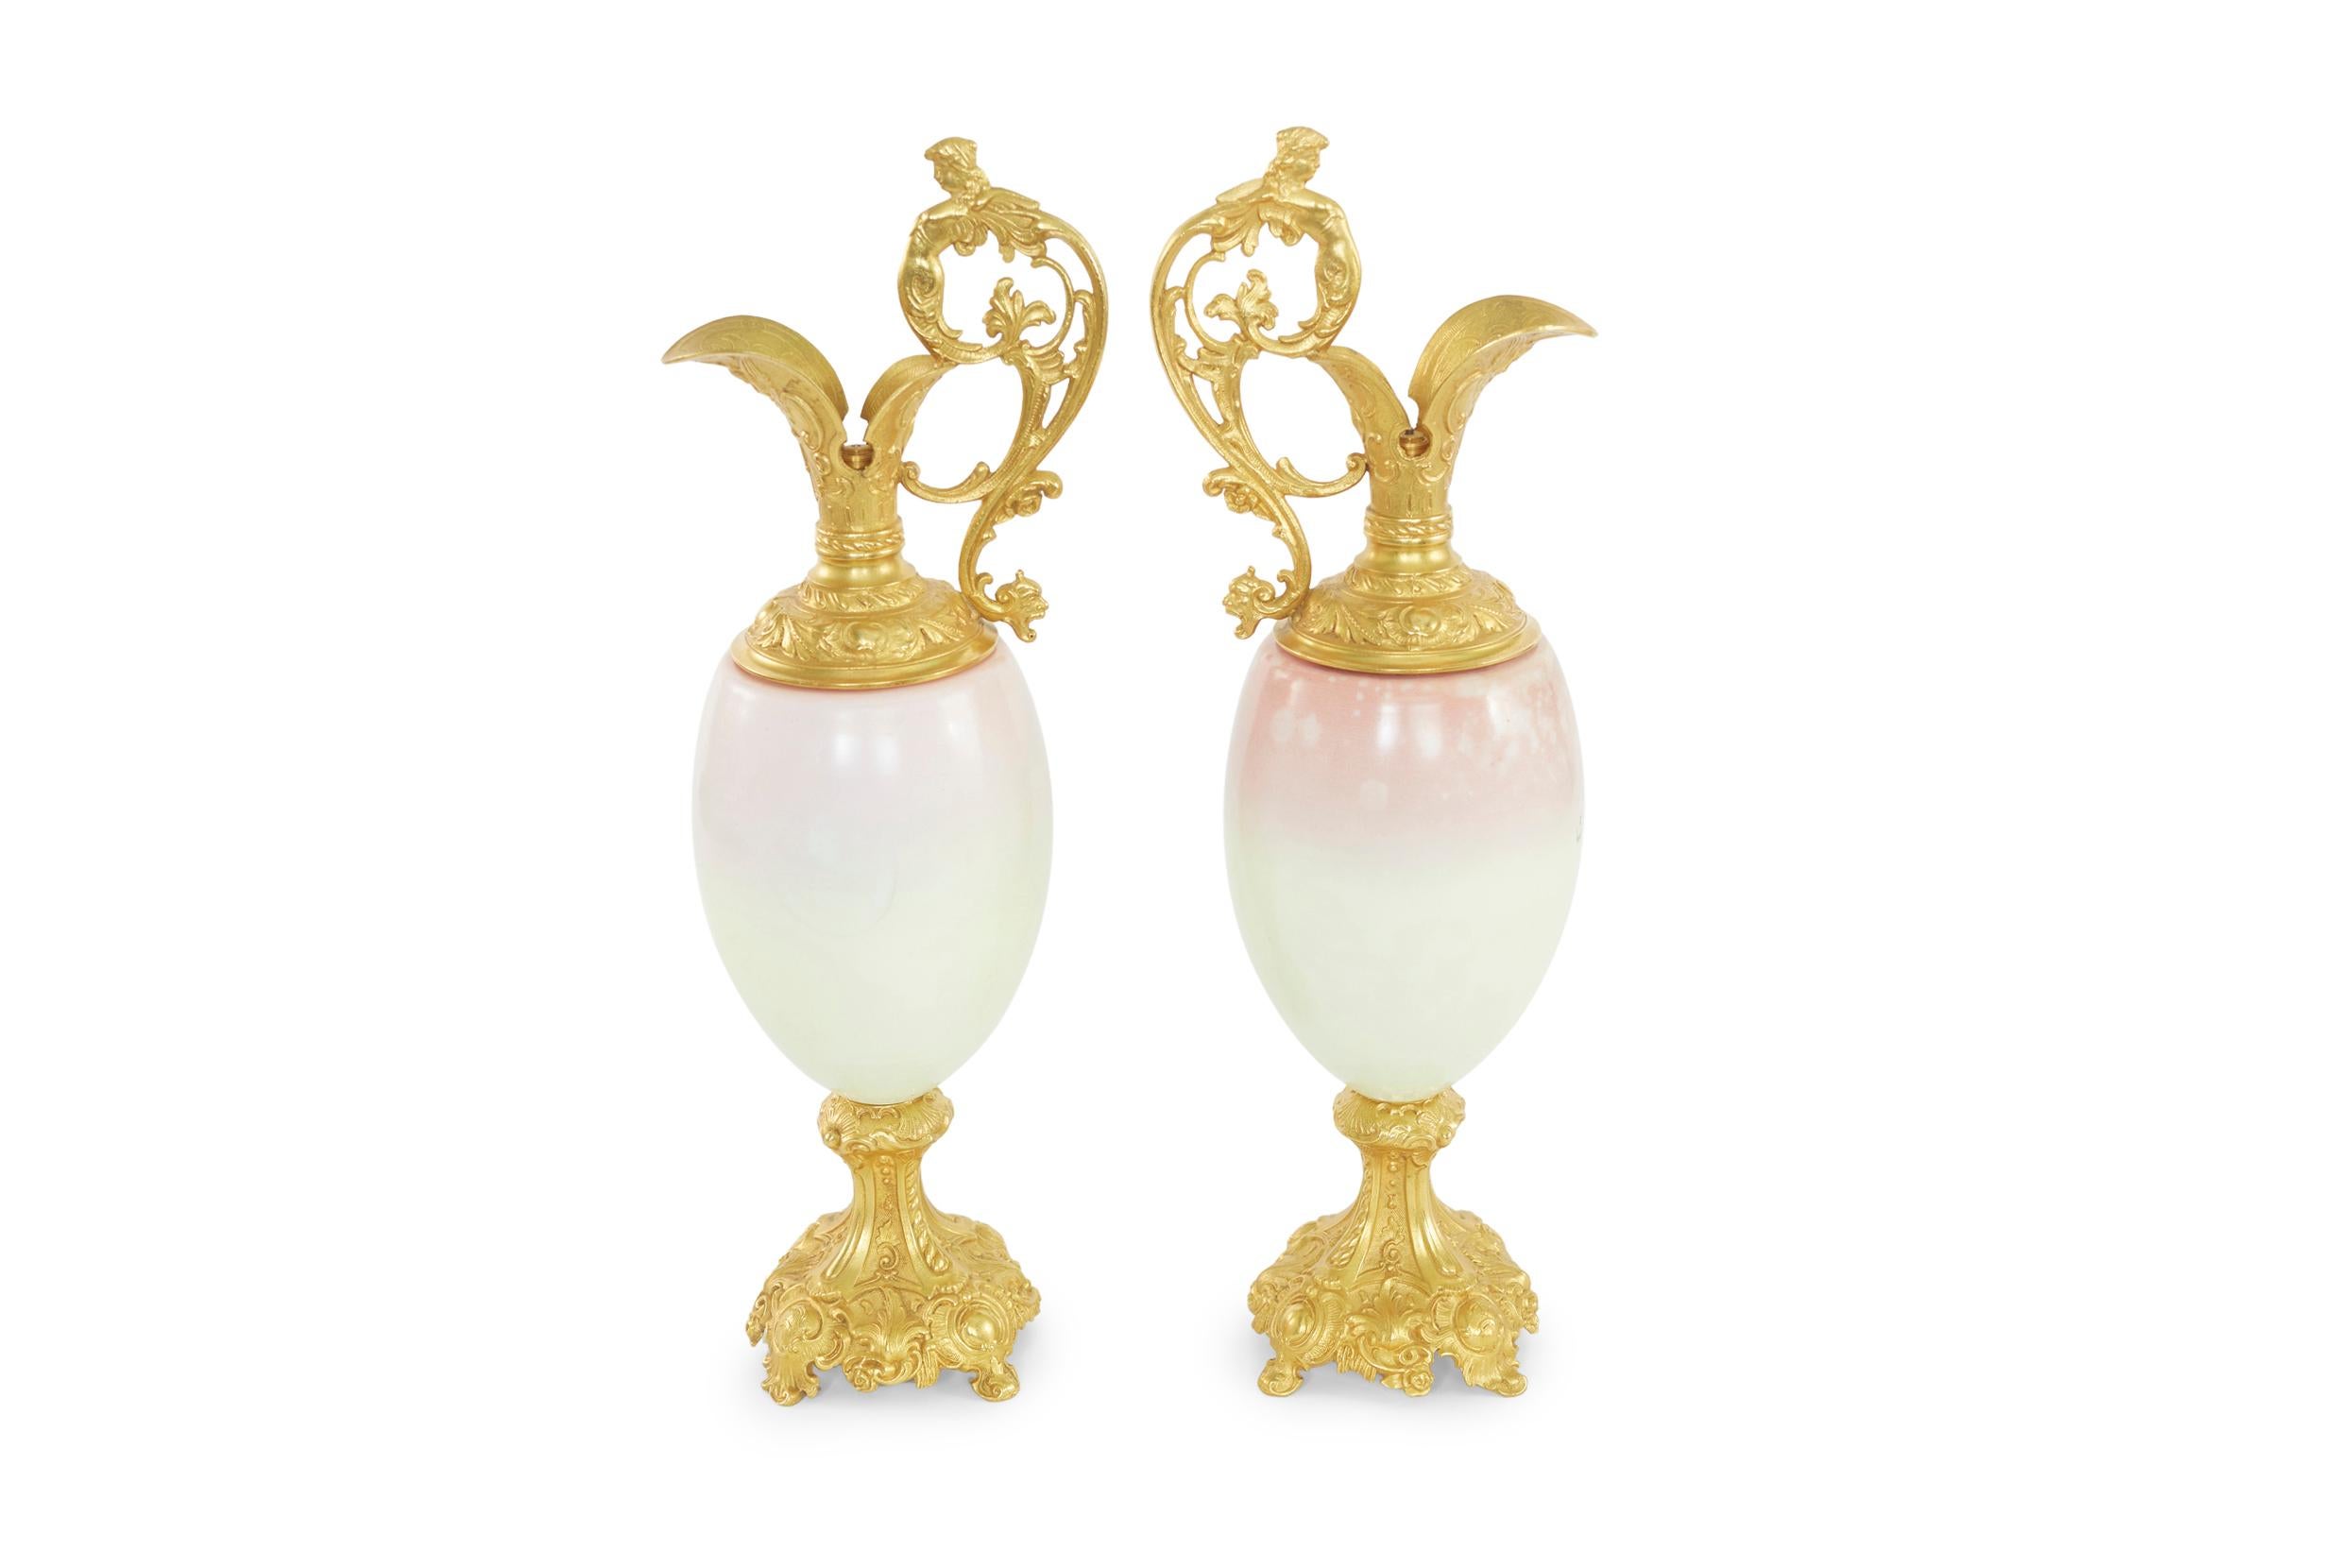 Late 19th century pair of ormolu mounted two handled sevres style decorative vase . Each one featuring an ovoid baluster shape with handle formed of maidens with a foliate scroll motif. Each vase / piece is in good condition, minor wear appropriate